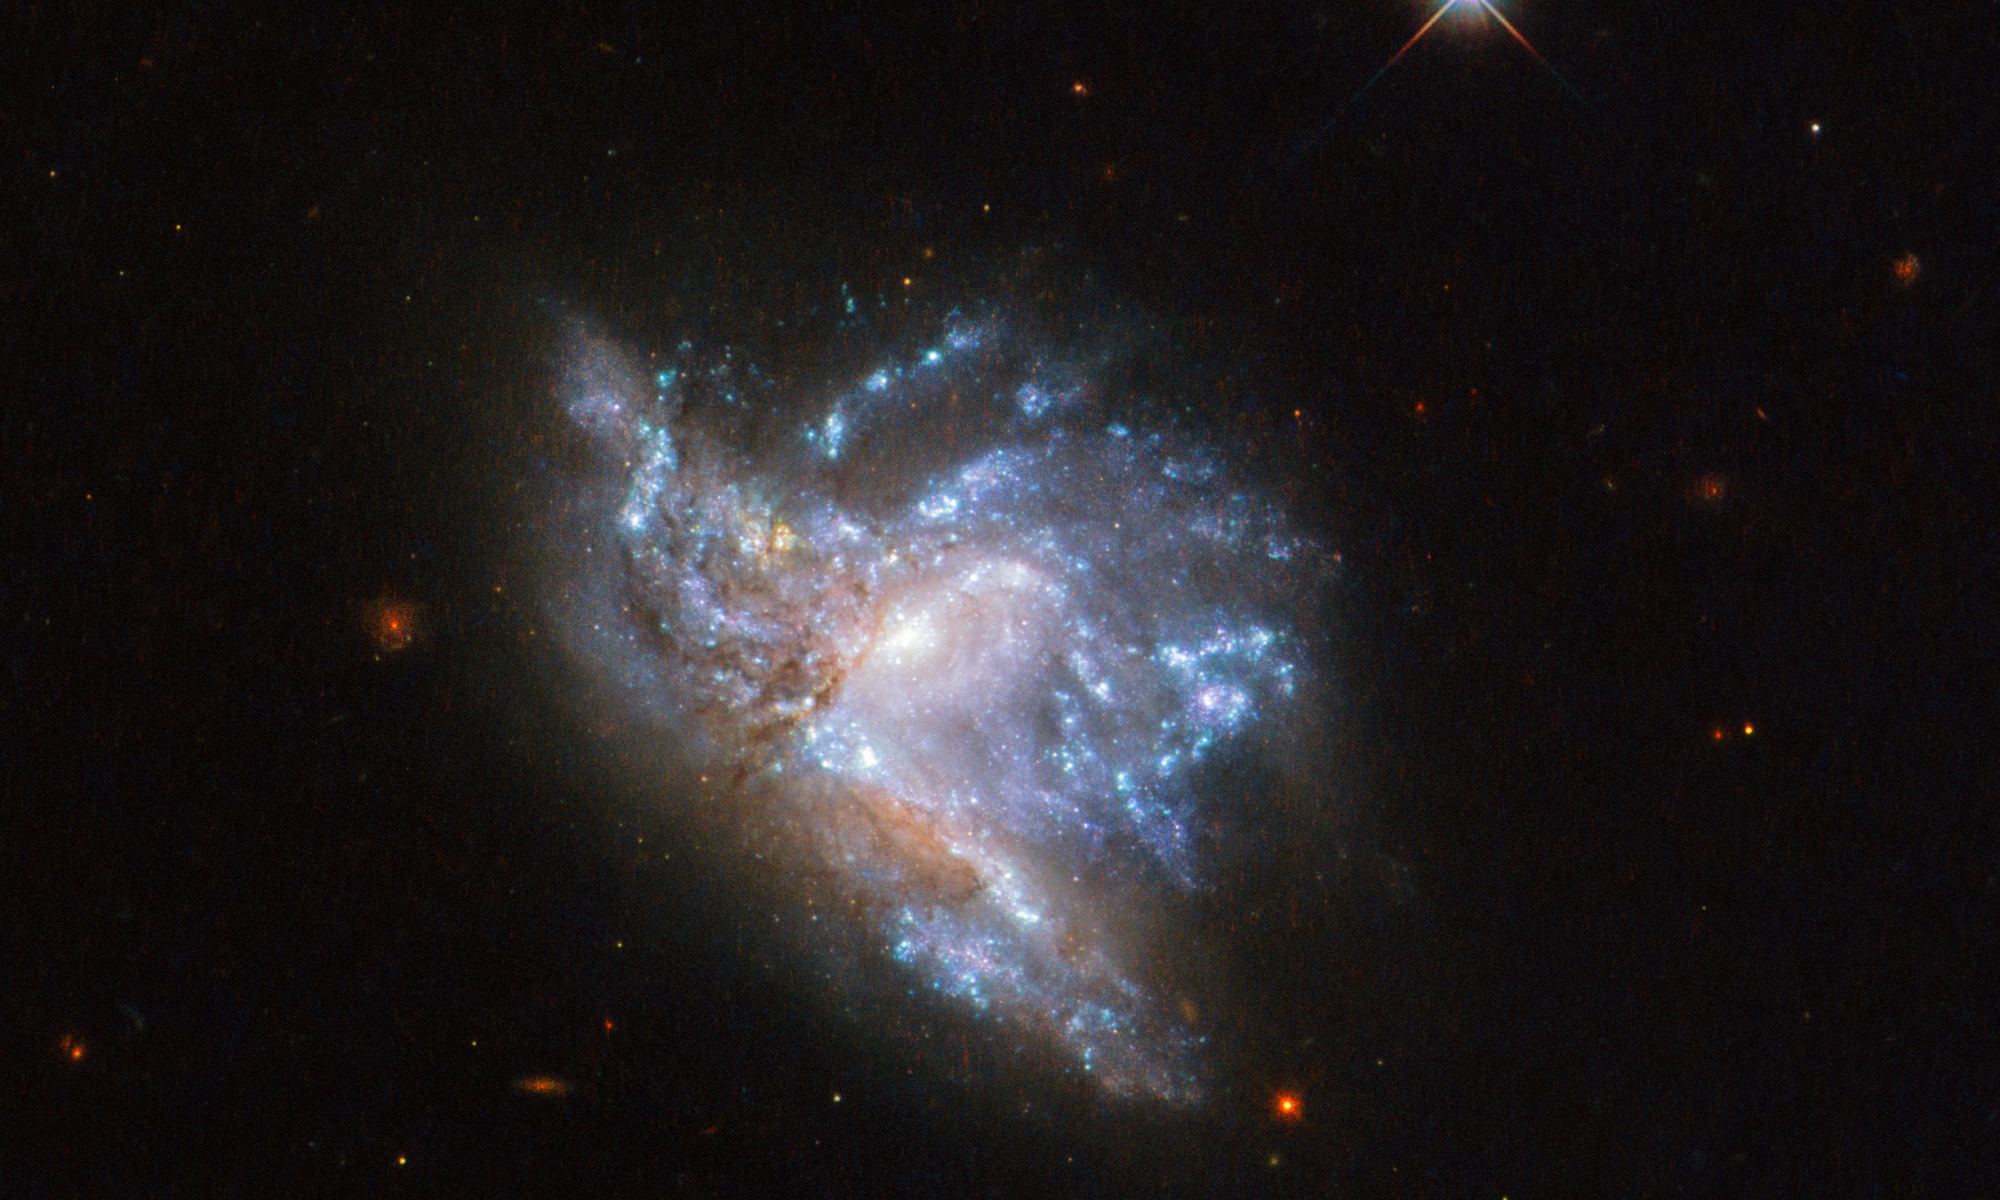 Located in the constellation of Hercules, about 230 million light-years away, NGC 6052 is a pair of colliding galaxies. Image Credit: ESA/Hubble & NASA, A. Adamo et al.